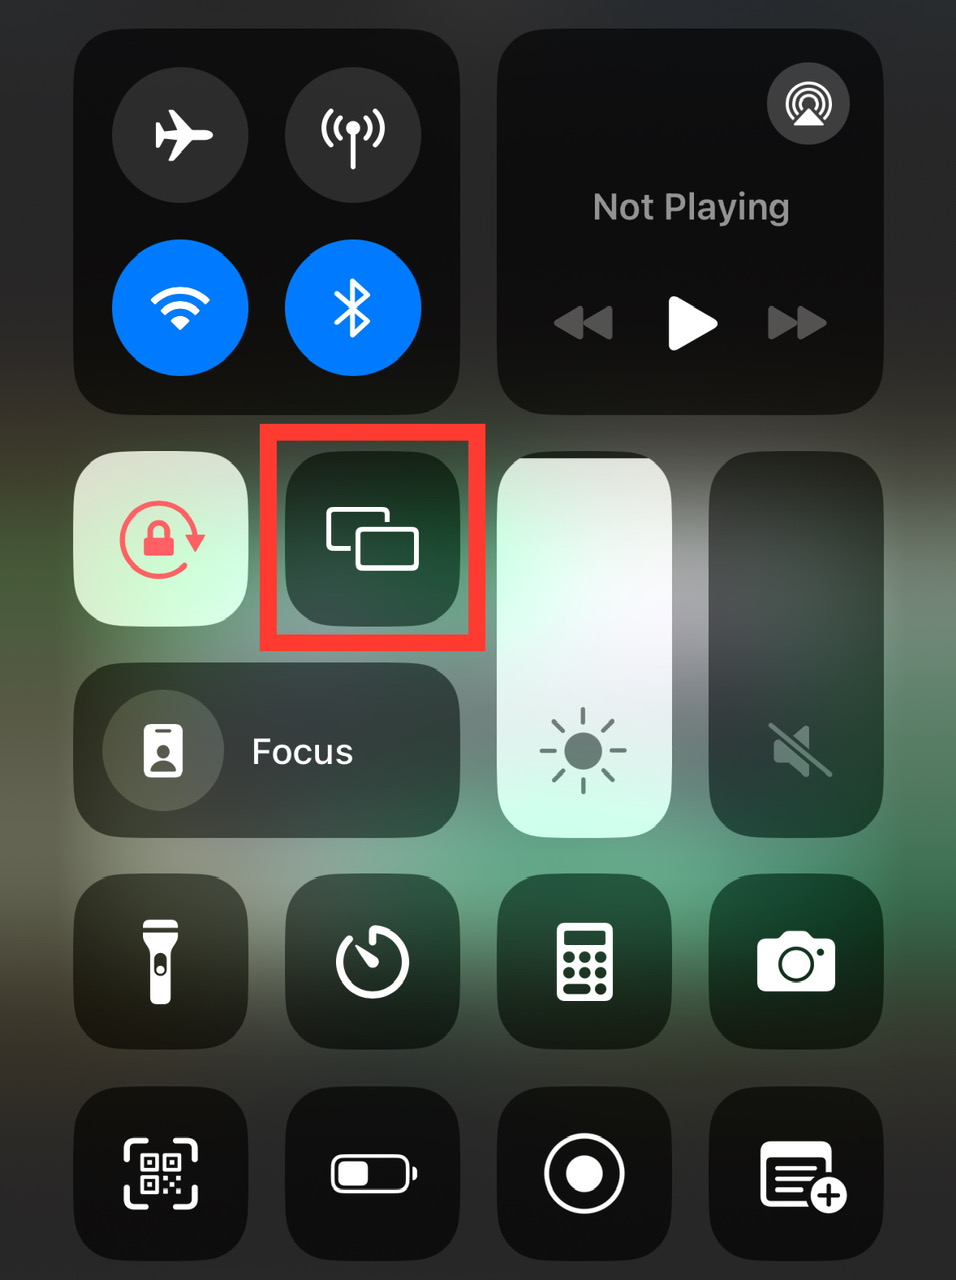 screen mirroring icon on an iphone is highlighted